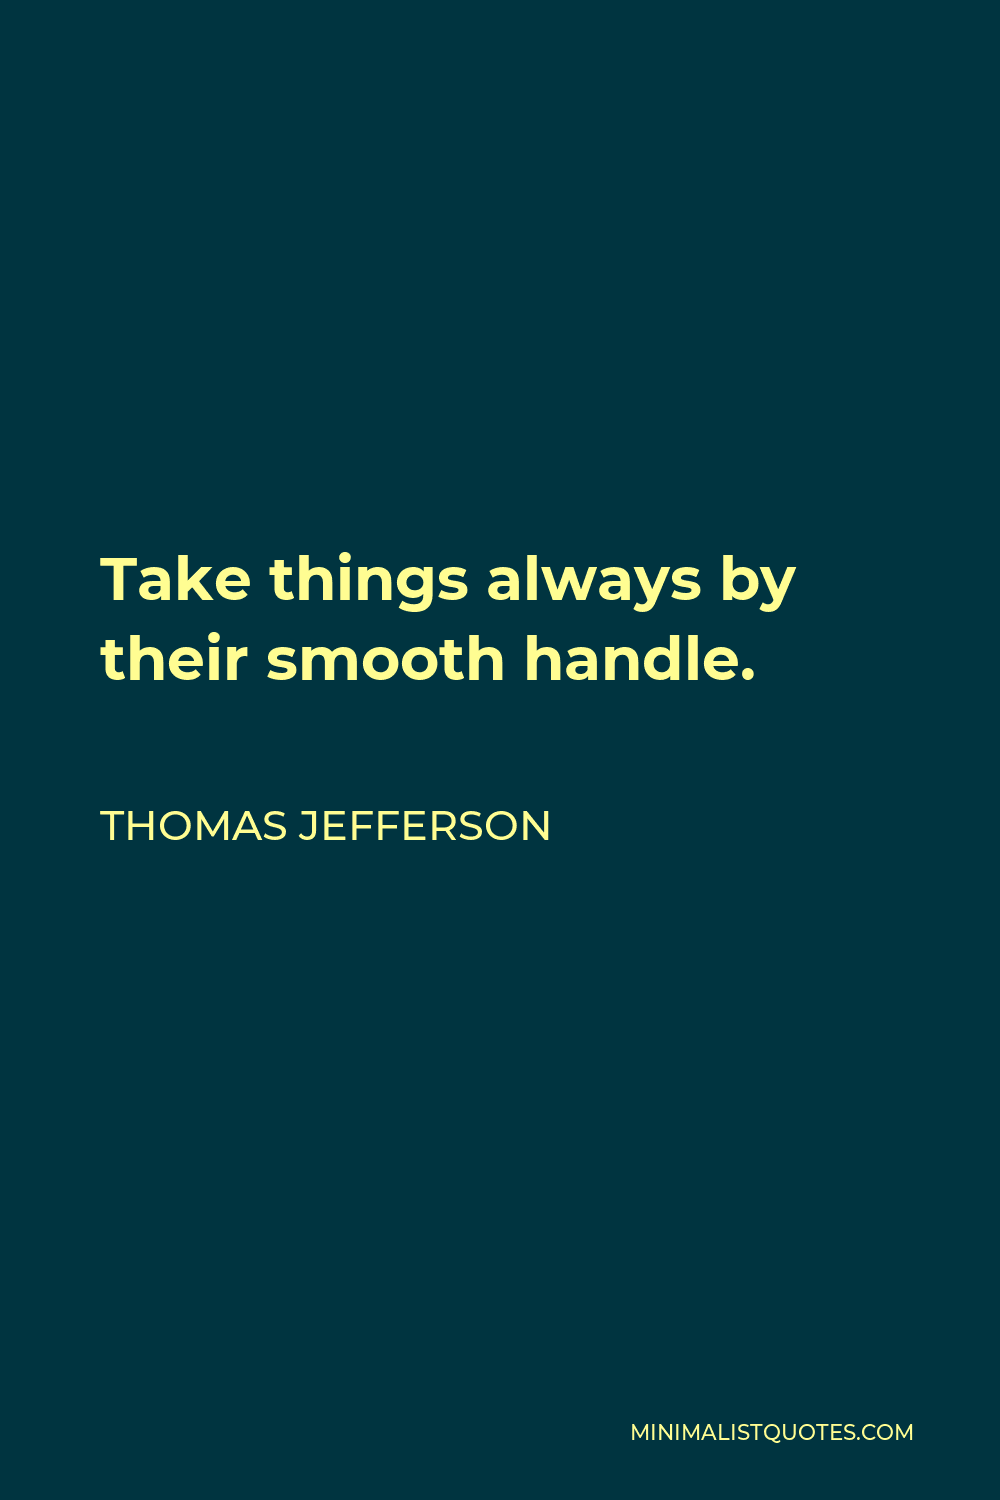 Thomas Jefferson Quote - Take things always by their smooth handle.